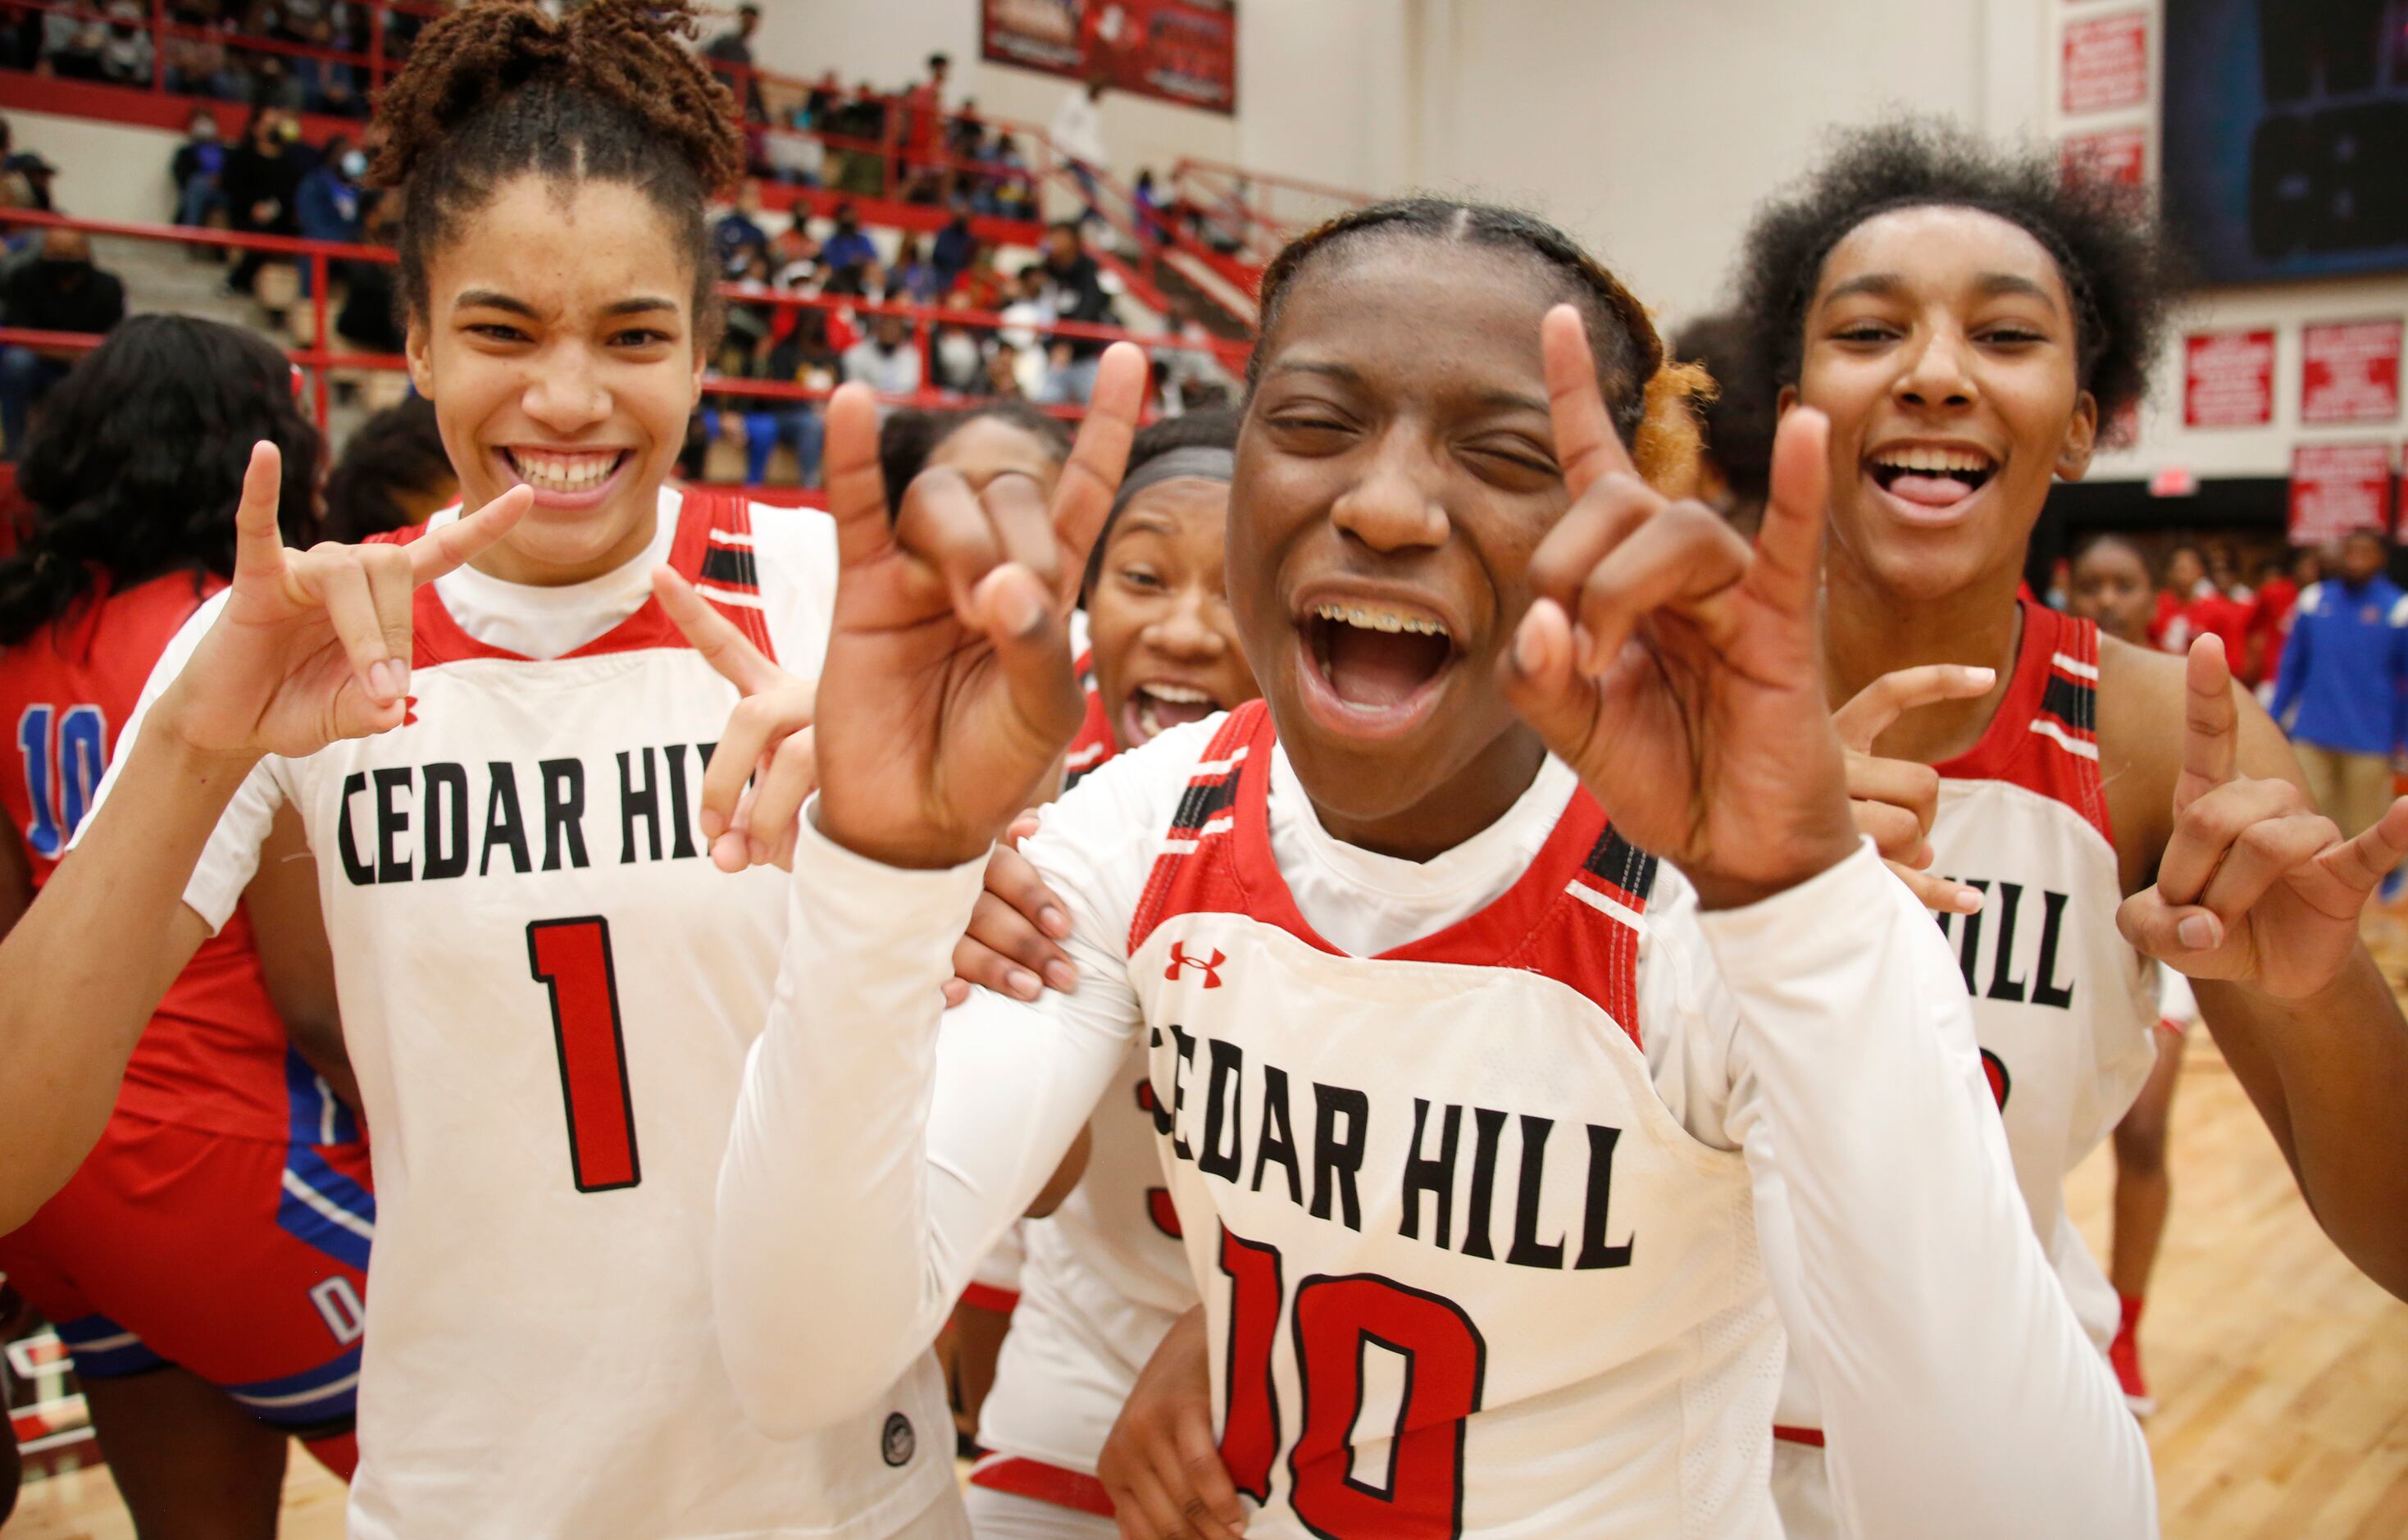 Cedar Hill players celebrate after their 80-72 victory over Duncanville. The two teams...